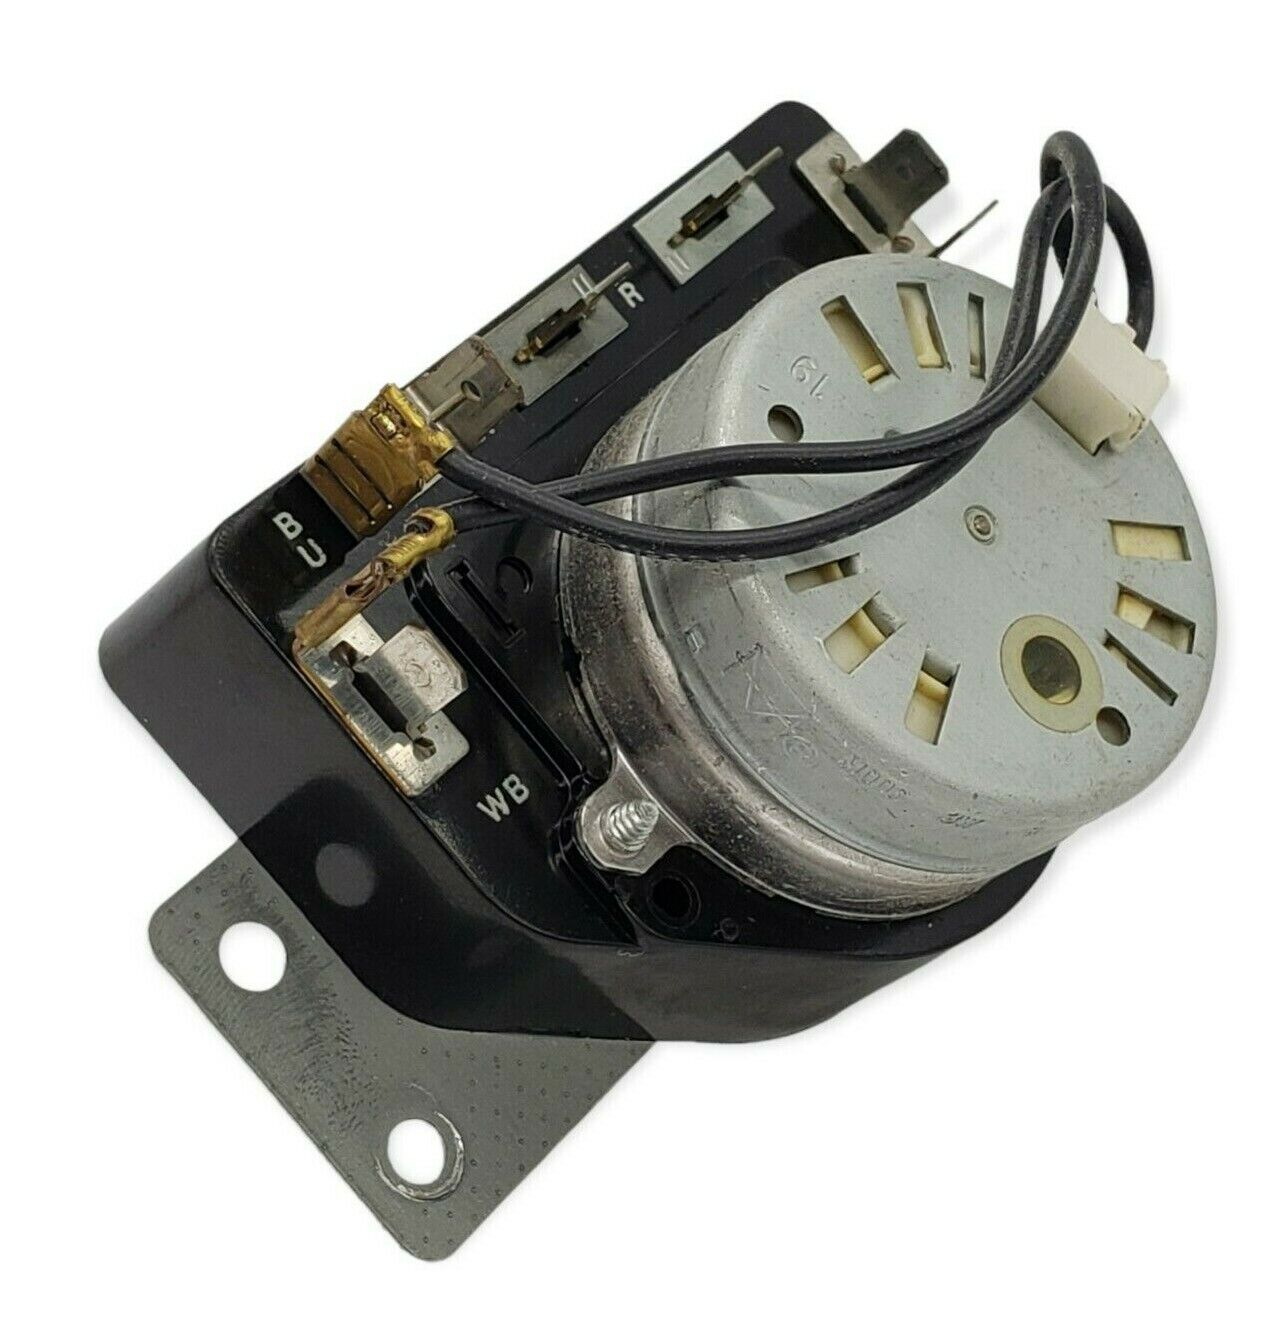 Genuine OEM Replacement for Whirlpool Dryer Timer 3396215